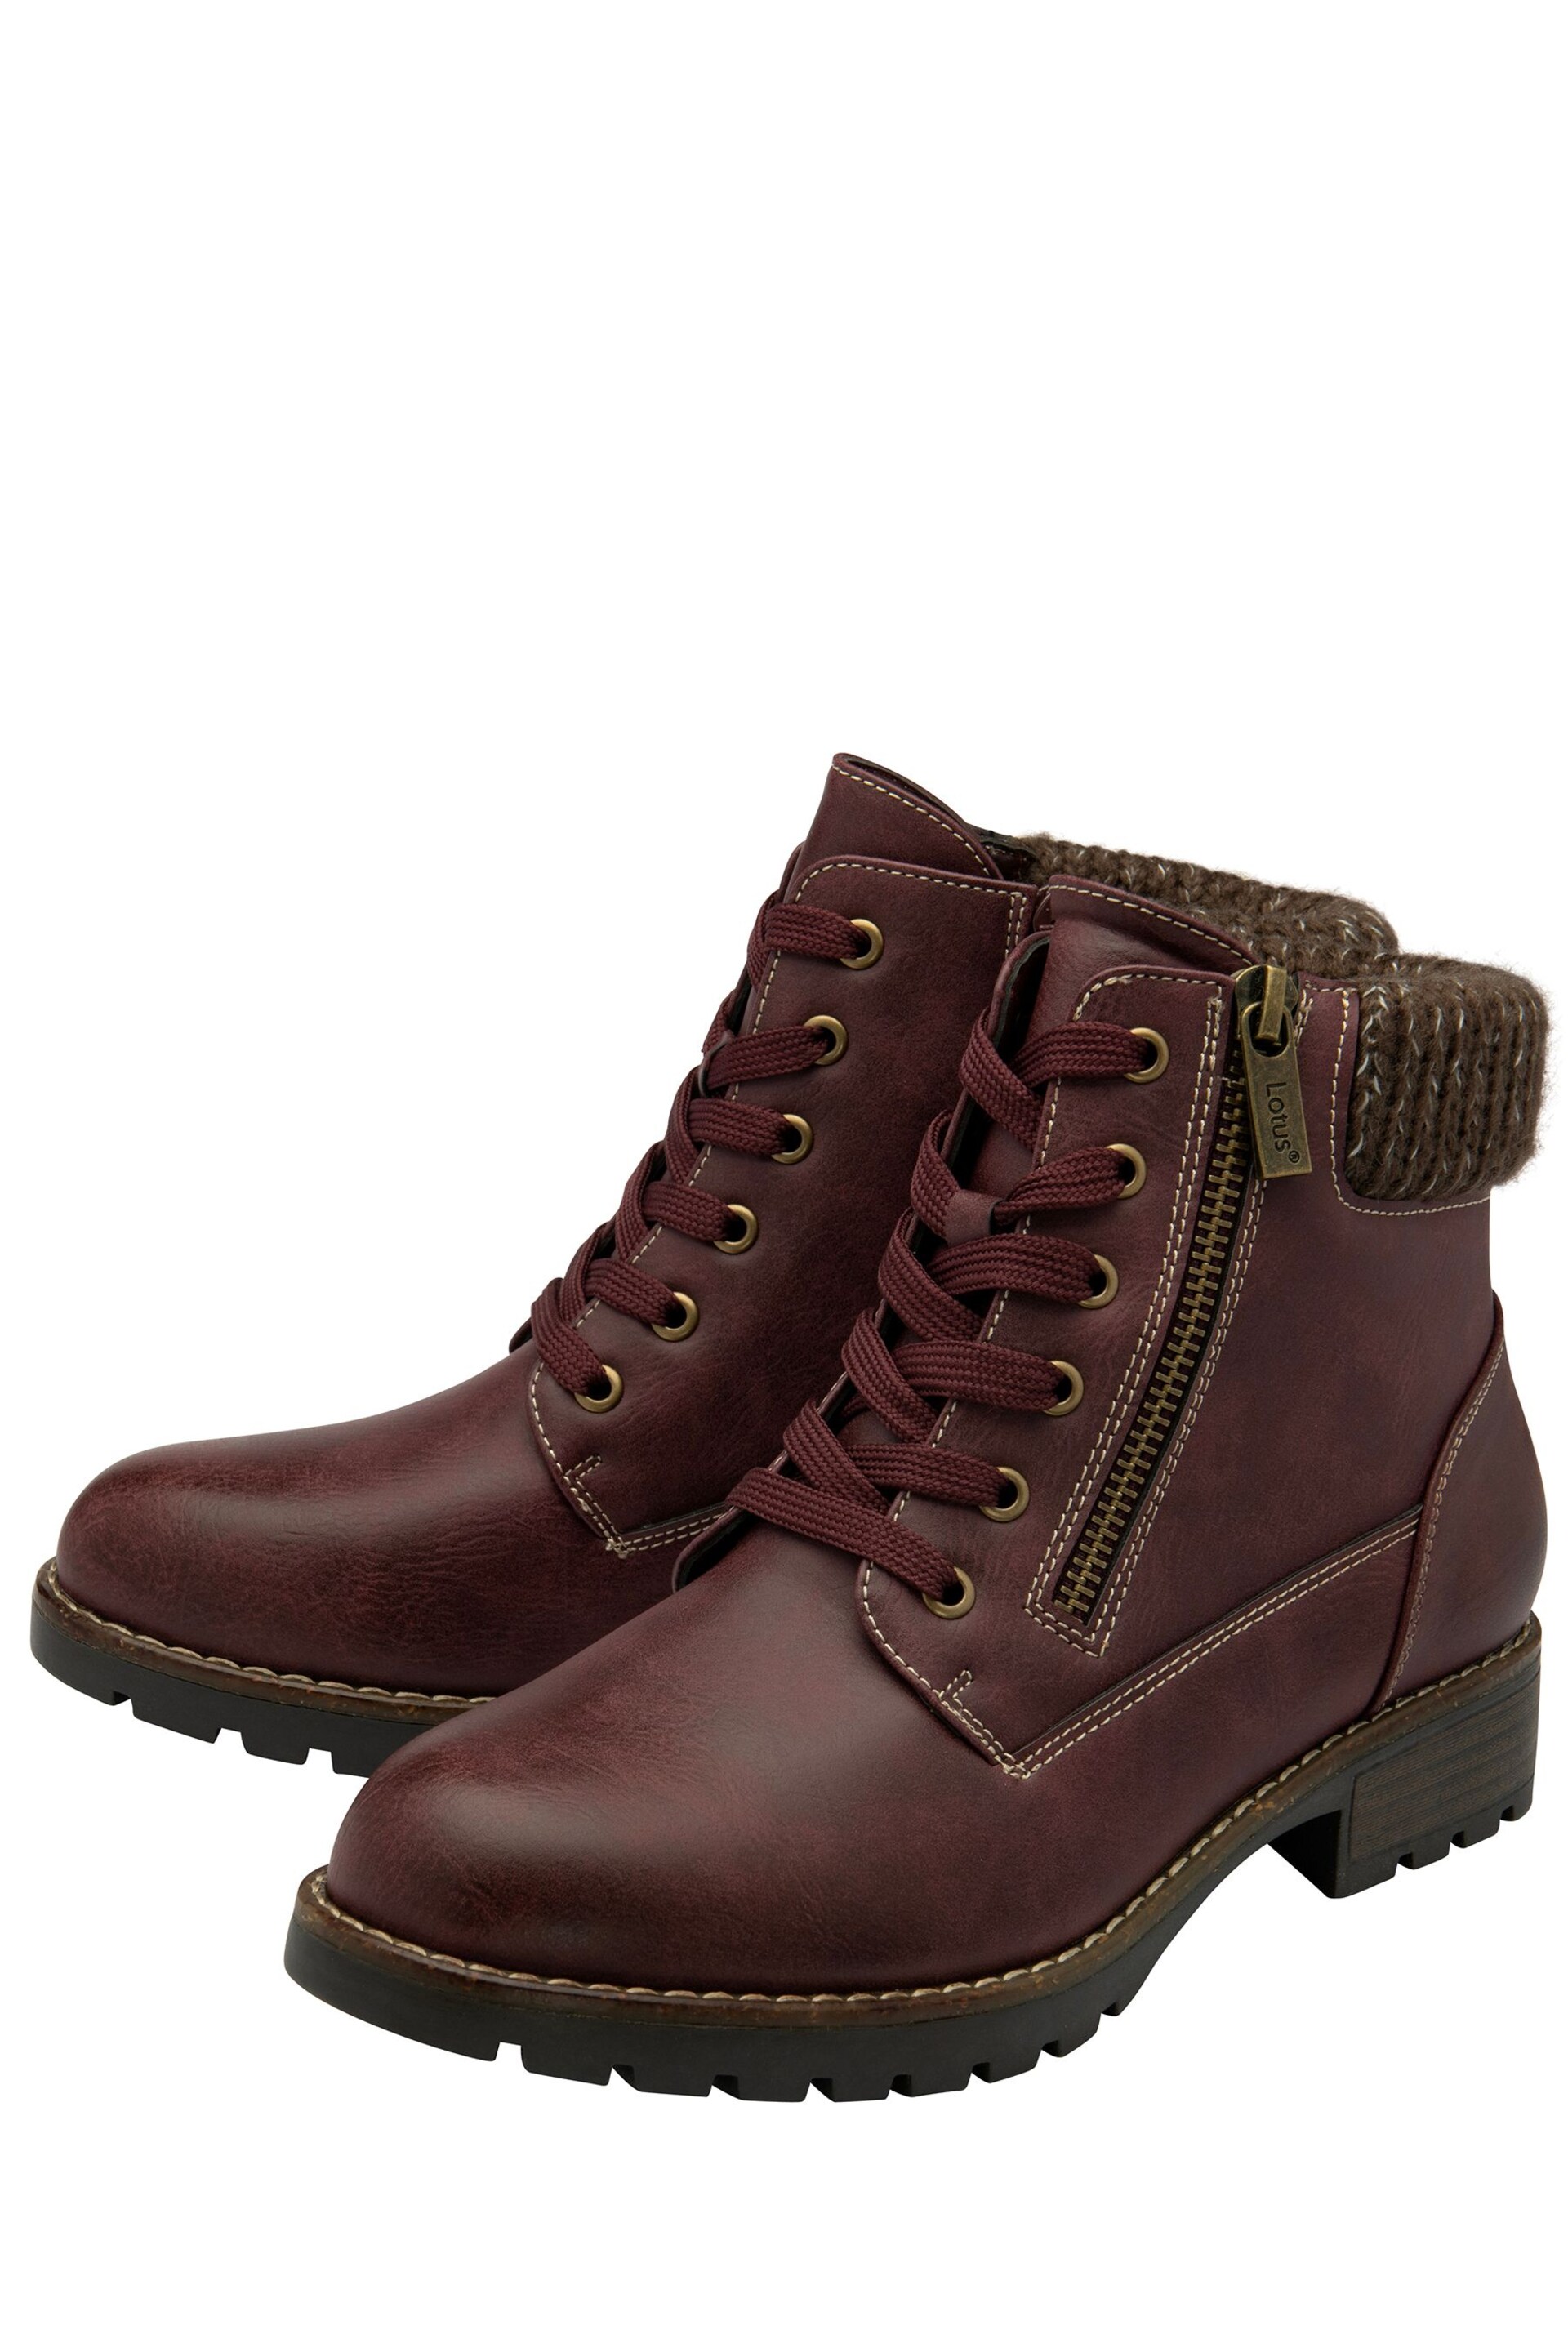 Lotus Red Lace-Up Ankle Boots - Image 3 of 4